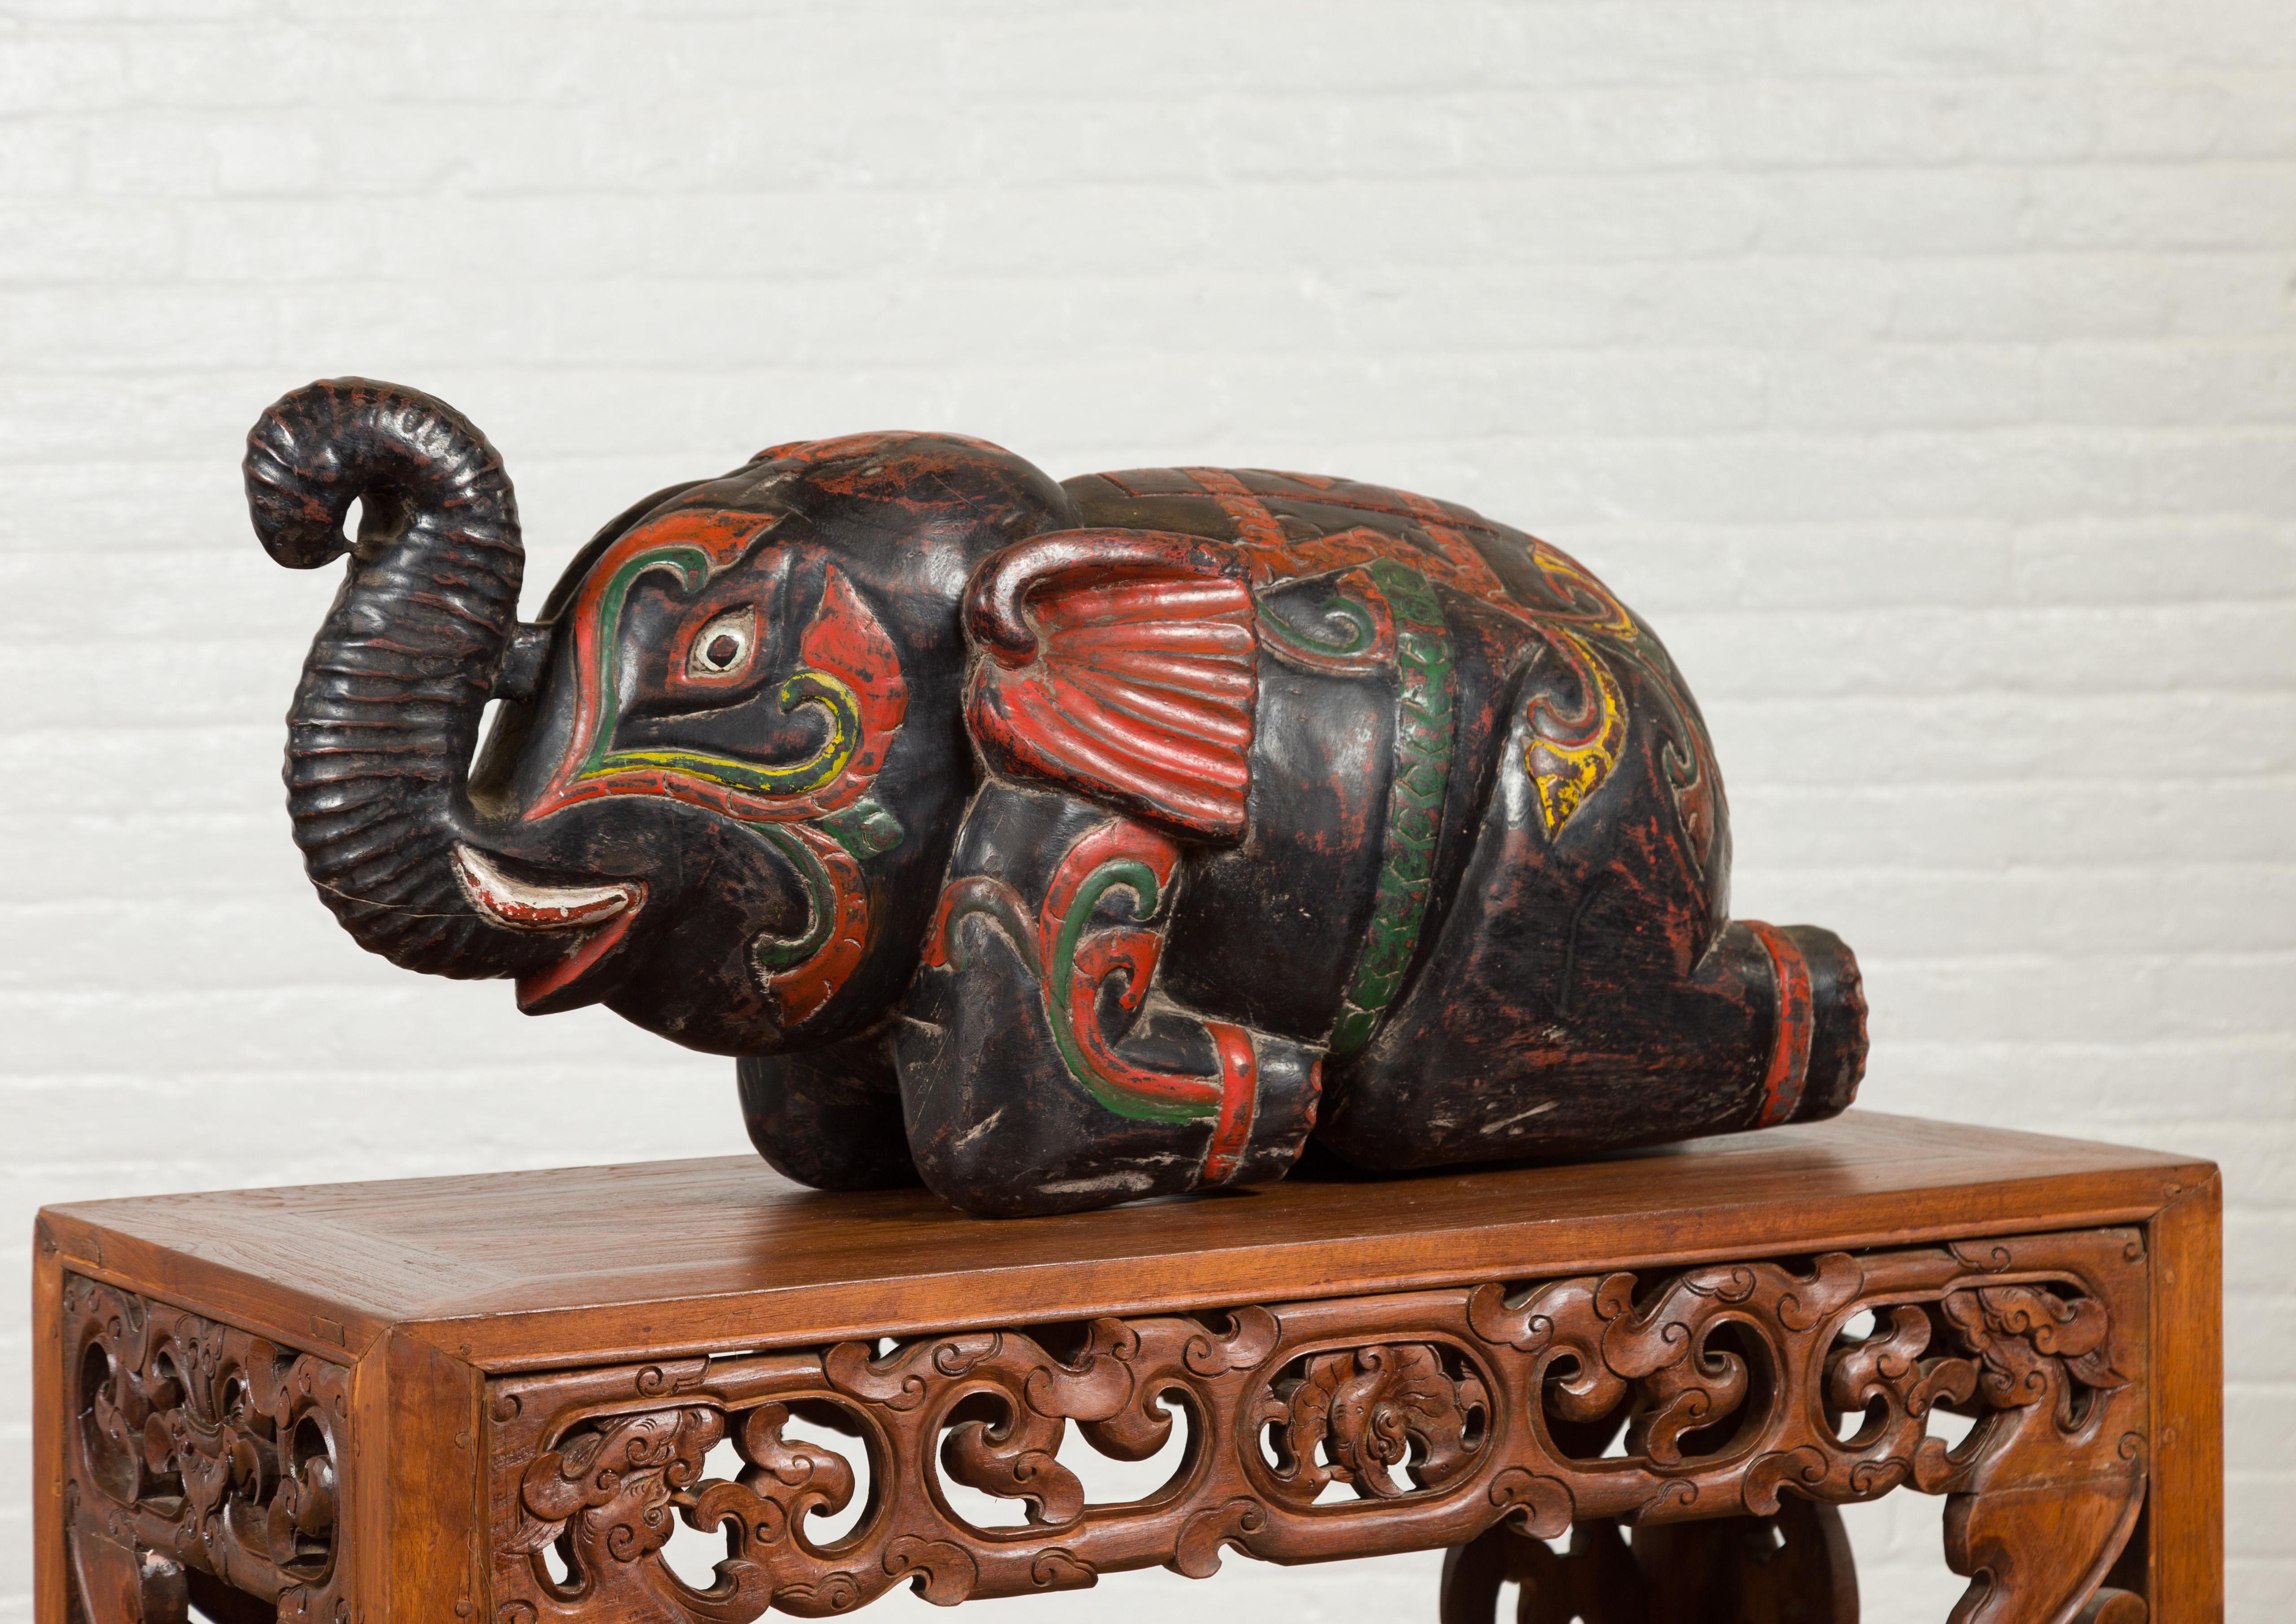 20th Century Handmade Asian Elephant Sculpture with Incised Decor and Multi-Color Finish